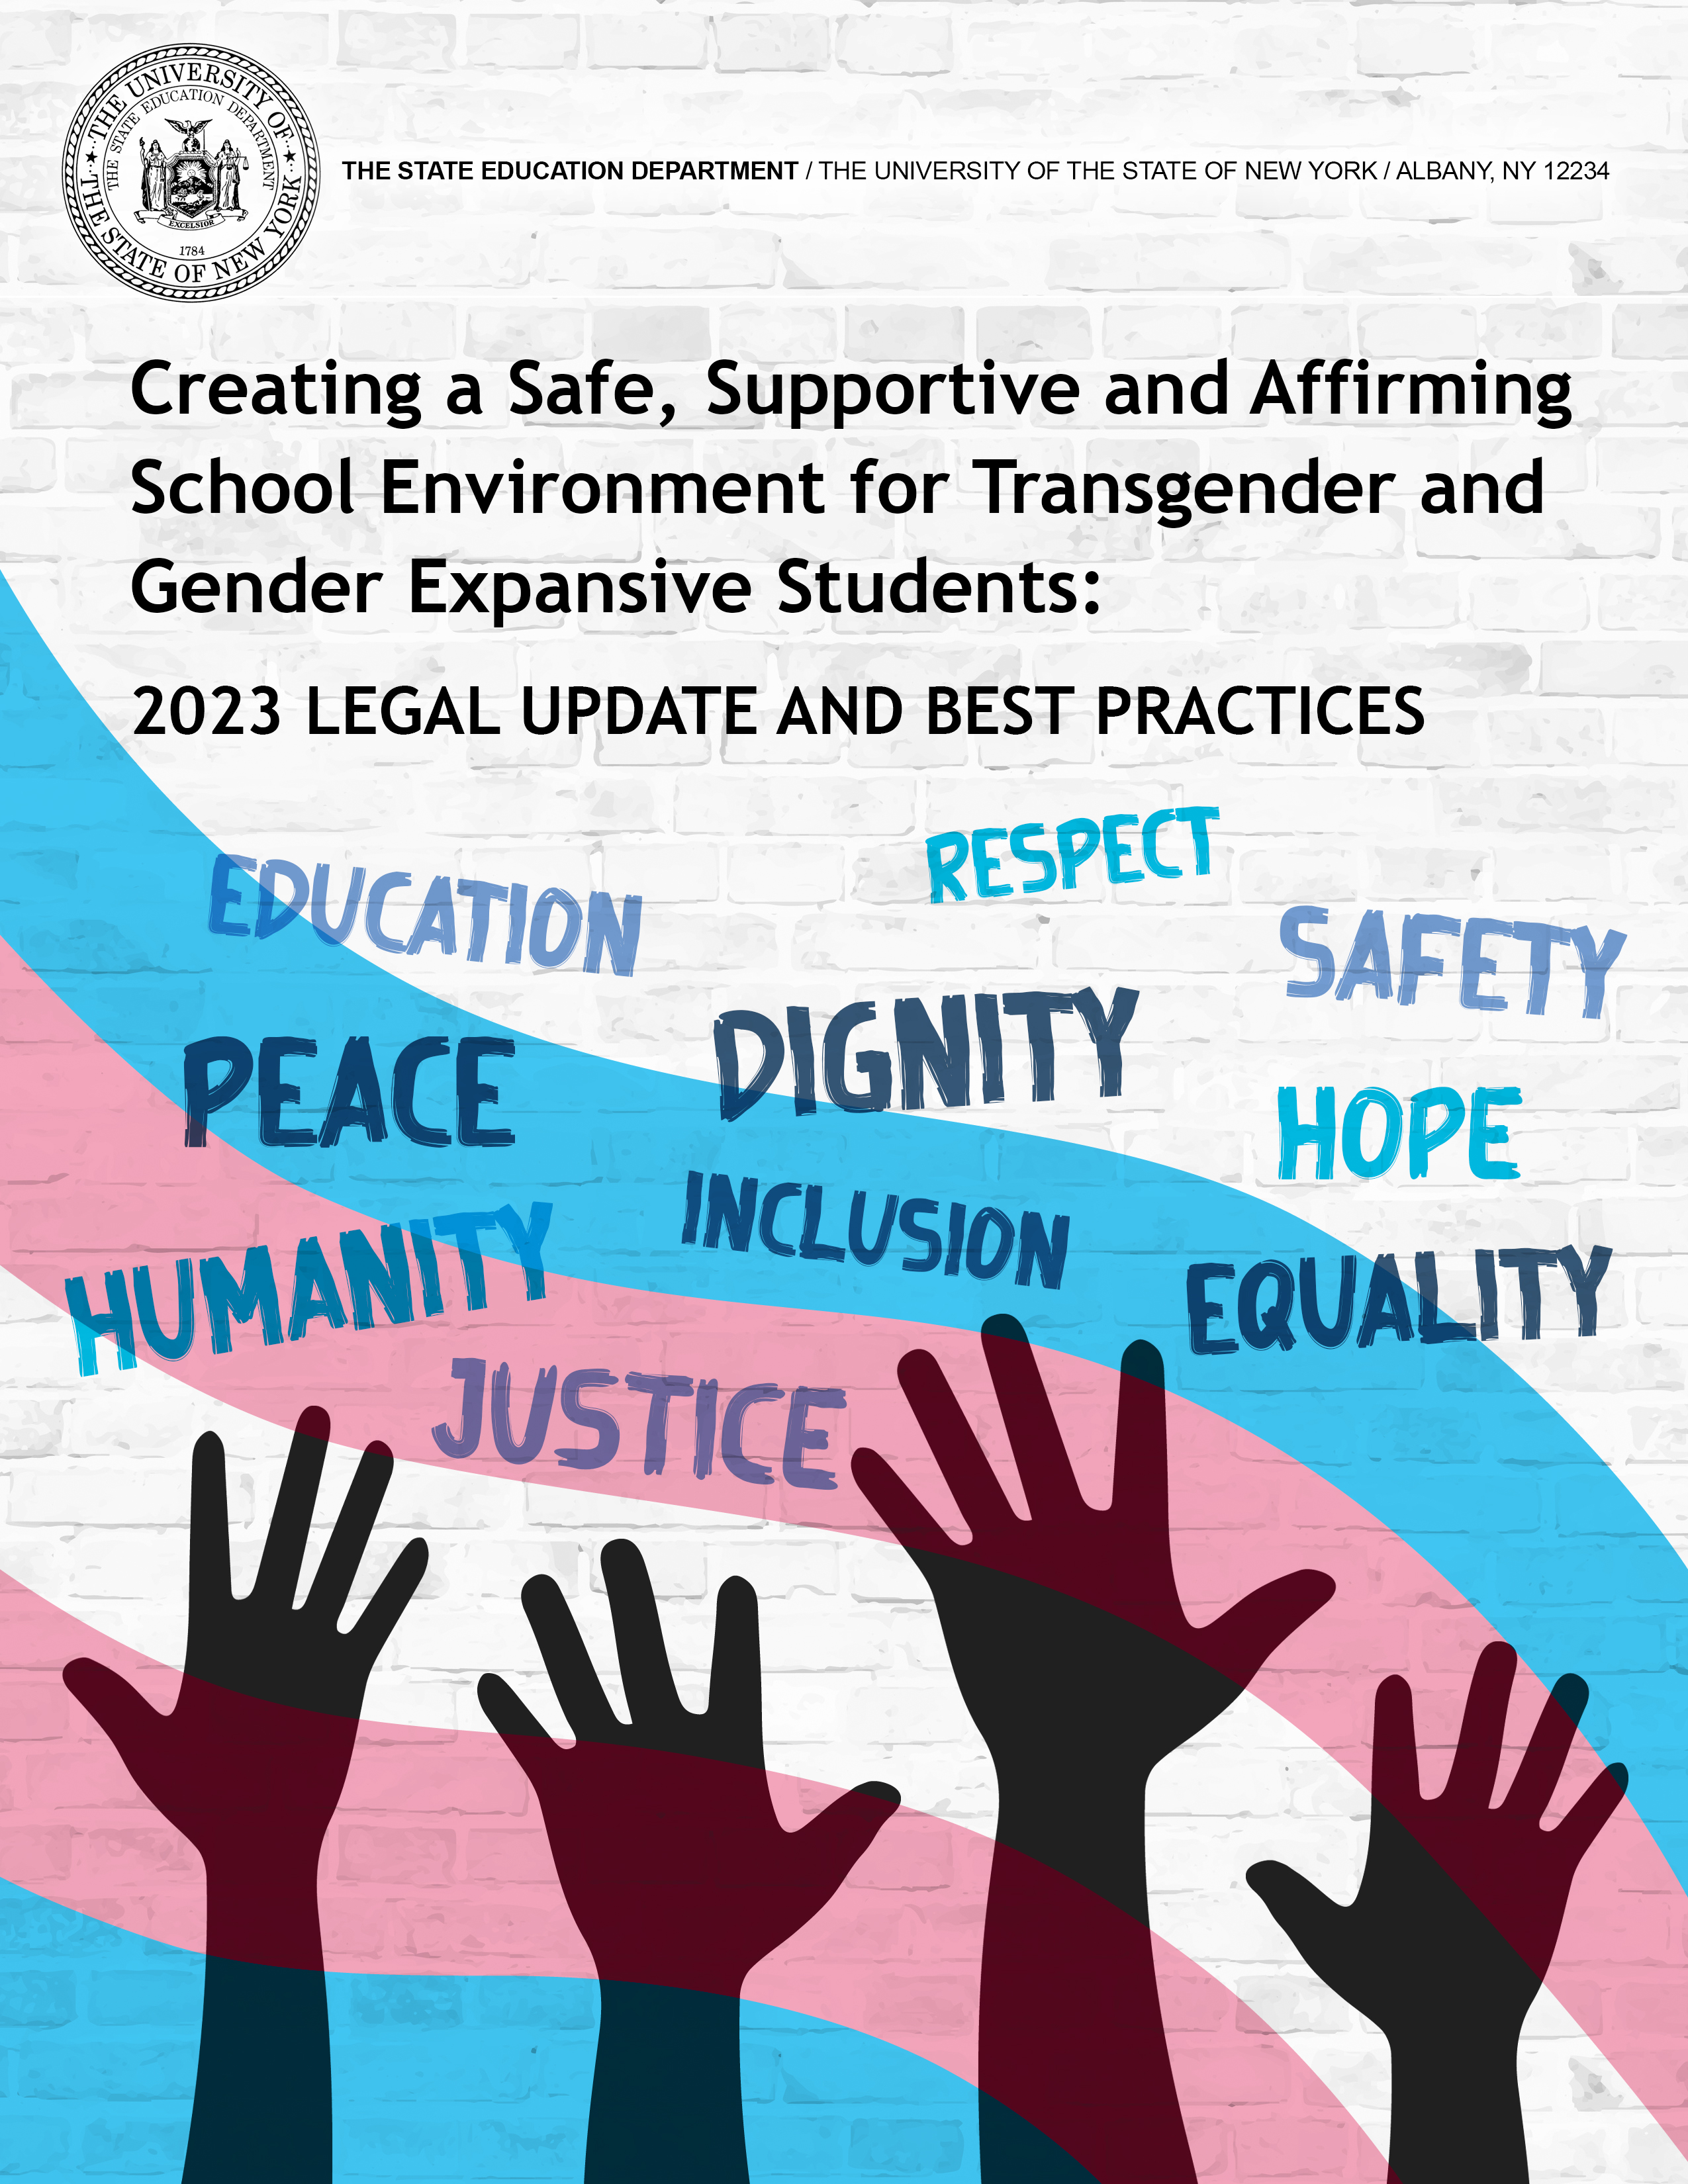 Four silhouette hands reaching up towards the words Education, Peace, Humanity, Respect, Dignity, Inclusion, Justice, Safety, Hope, and Equality.  The colors of the transgender flag wave over the bottom half of the image.